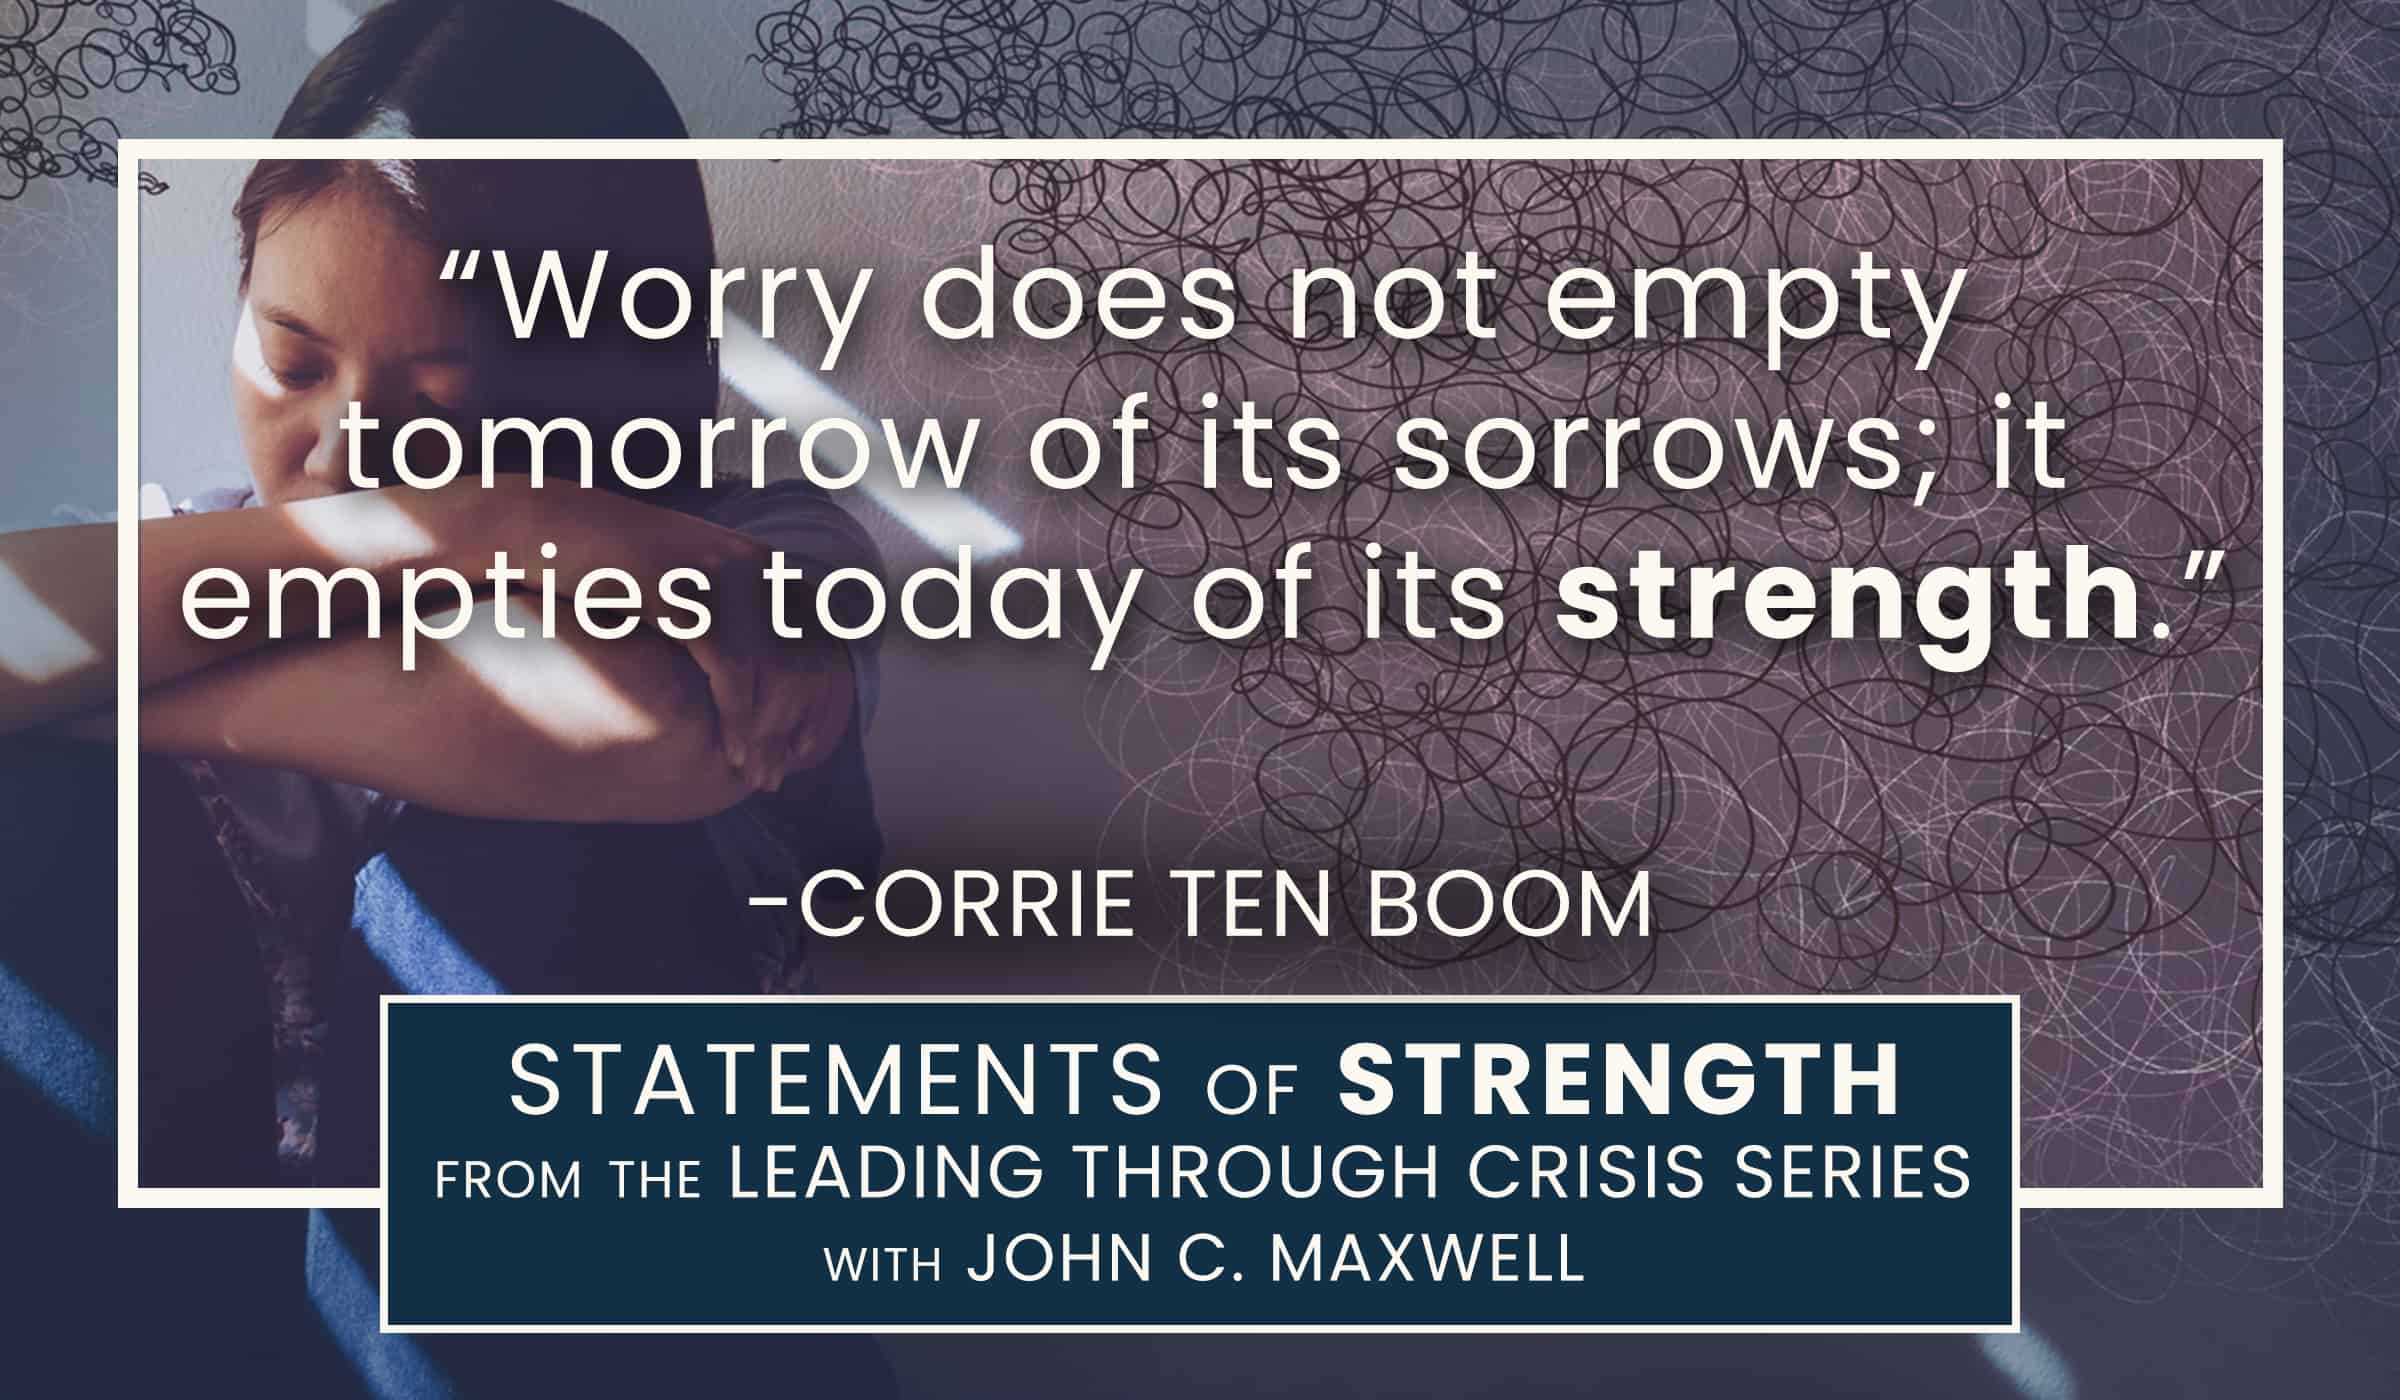 image of quotation picture with quote from corrie ten boom